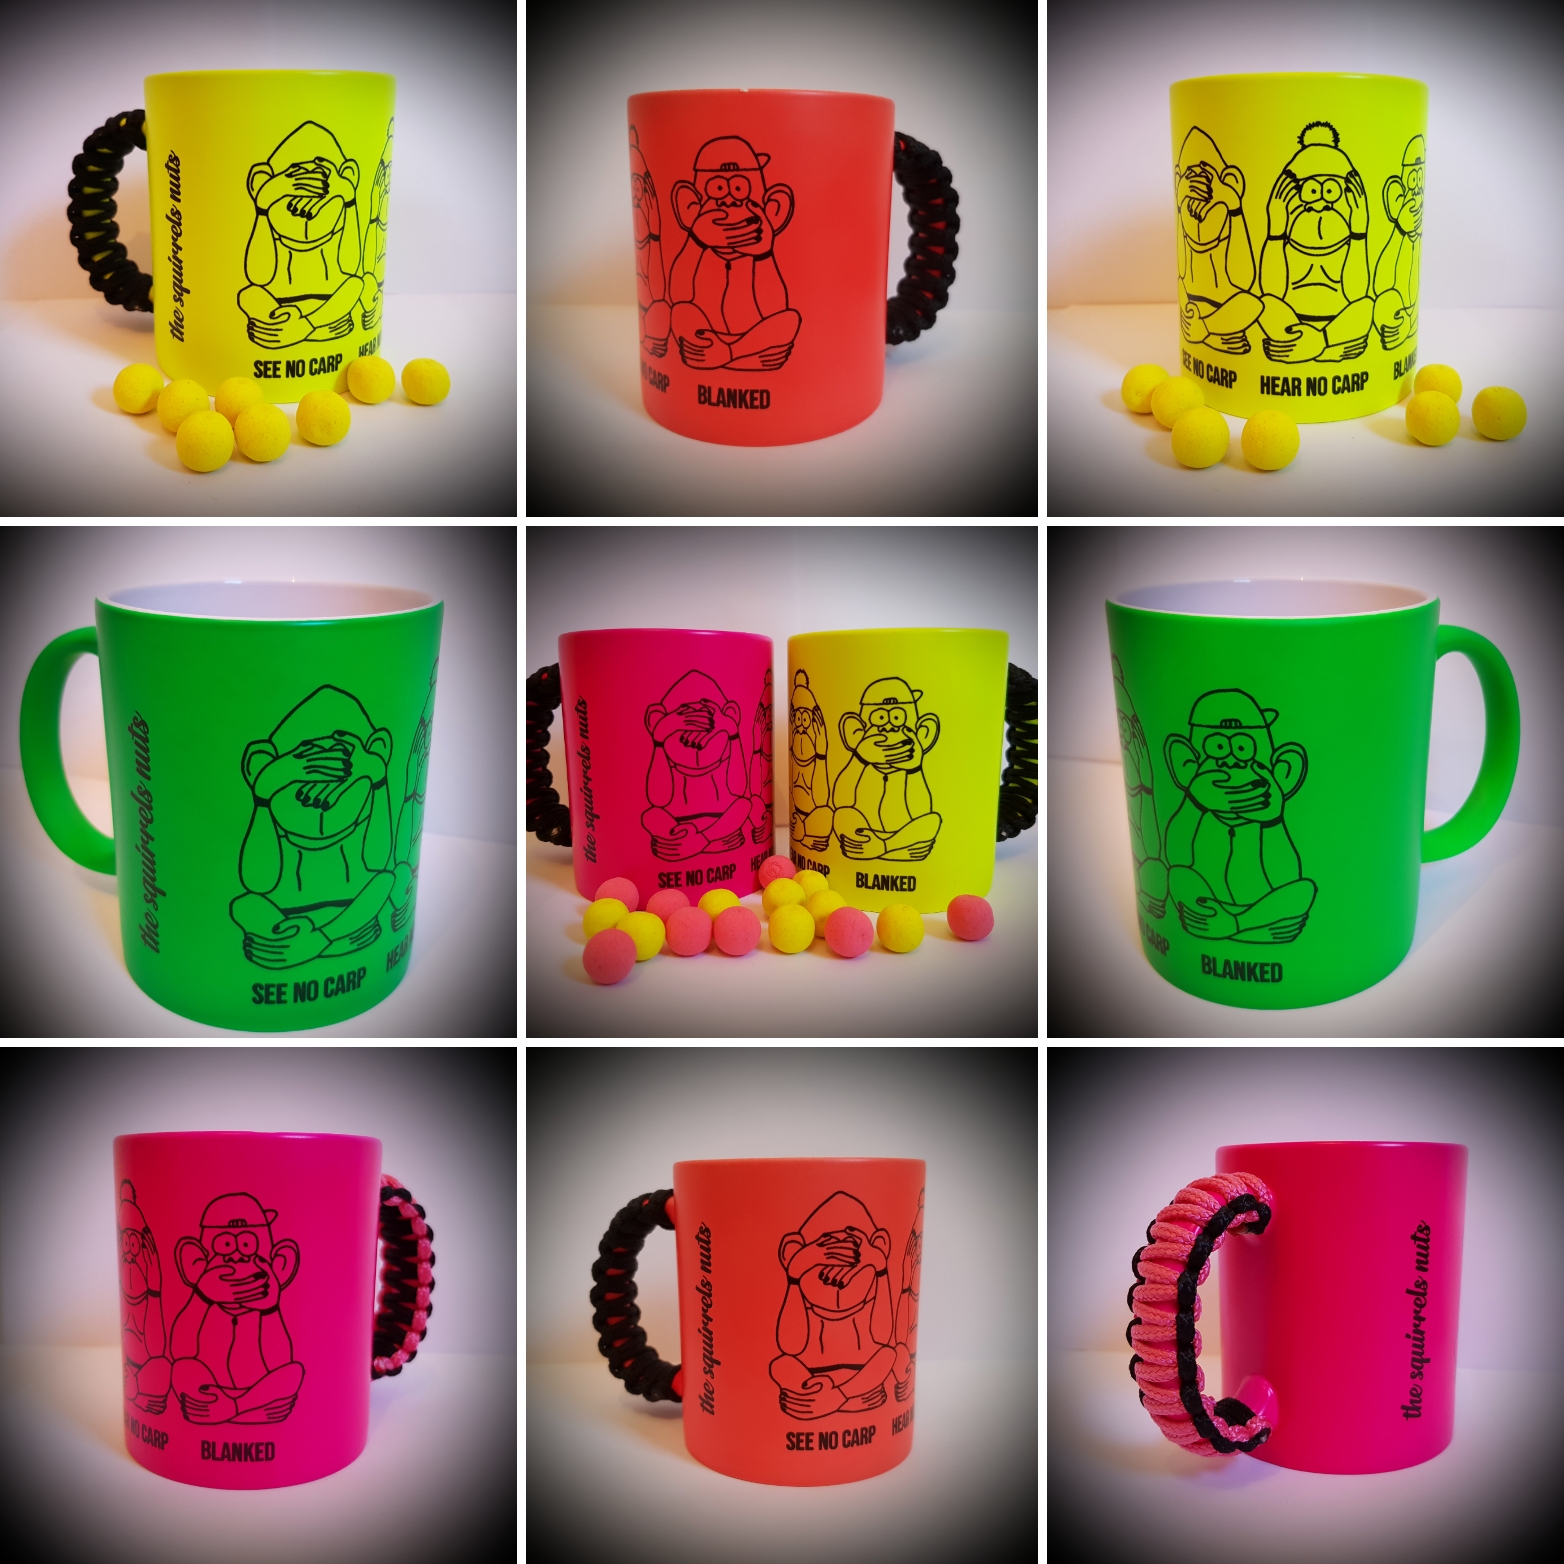 The Squirrels Nuts Details about   Lime Patch Monkeys Carp Fishing Mug Three Unwise Monkeys 